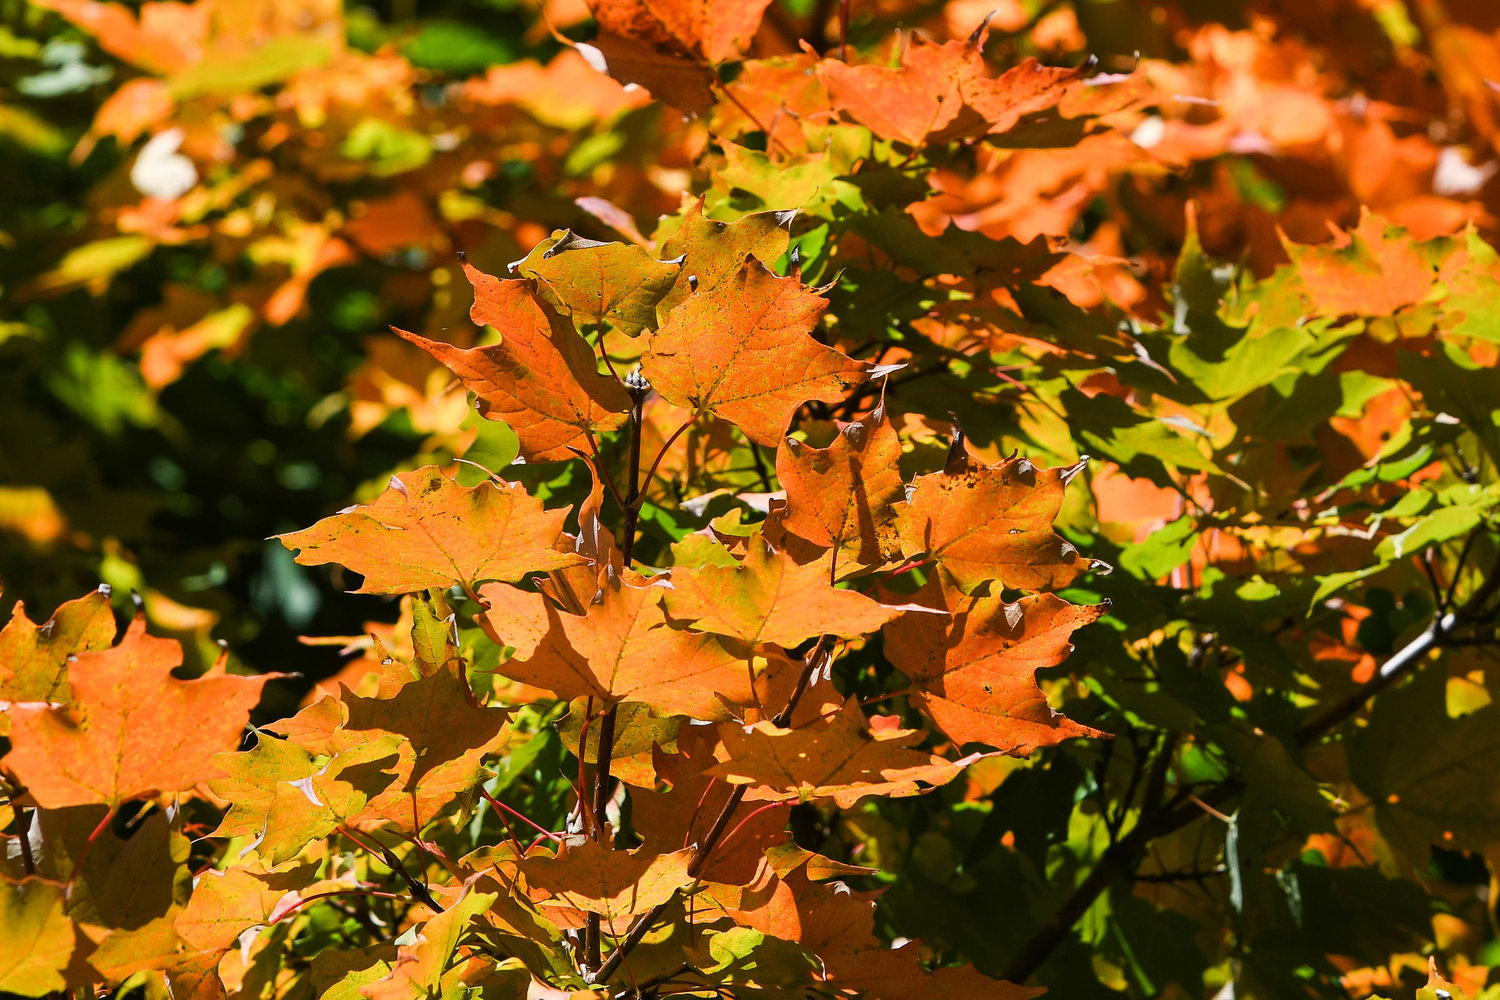 Leaves begin to change colors on a portion of a tree along Master Garden Road on Thursday in Utica. Fall foliage is beginning to pop out across New York State, with some significant early color changes expected in the higher elevations of the Adirondacks and Catskills, according to field reports from volunteer observers for the Empire State Development Division of Tourism’s I LOVE NY program. Locally, fall foliage observers say their is roughly 30% change in color in the Utica/Rome area with nearly 55% change in the Old Forge area.